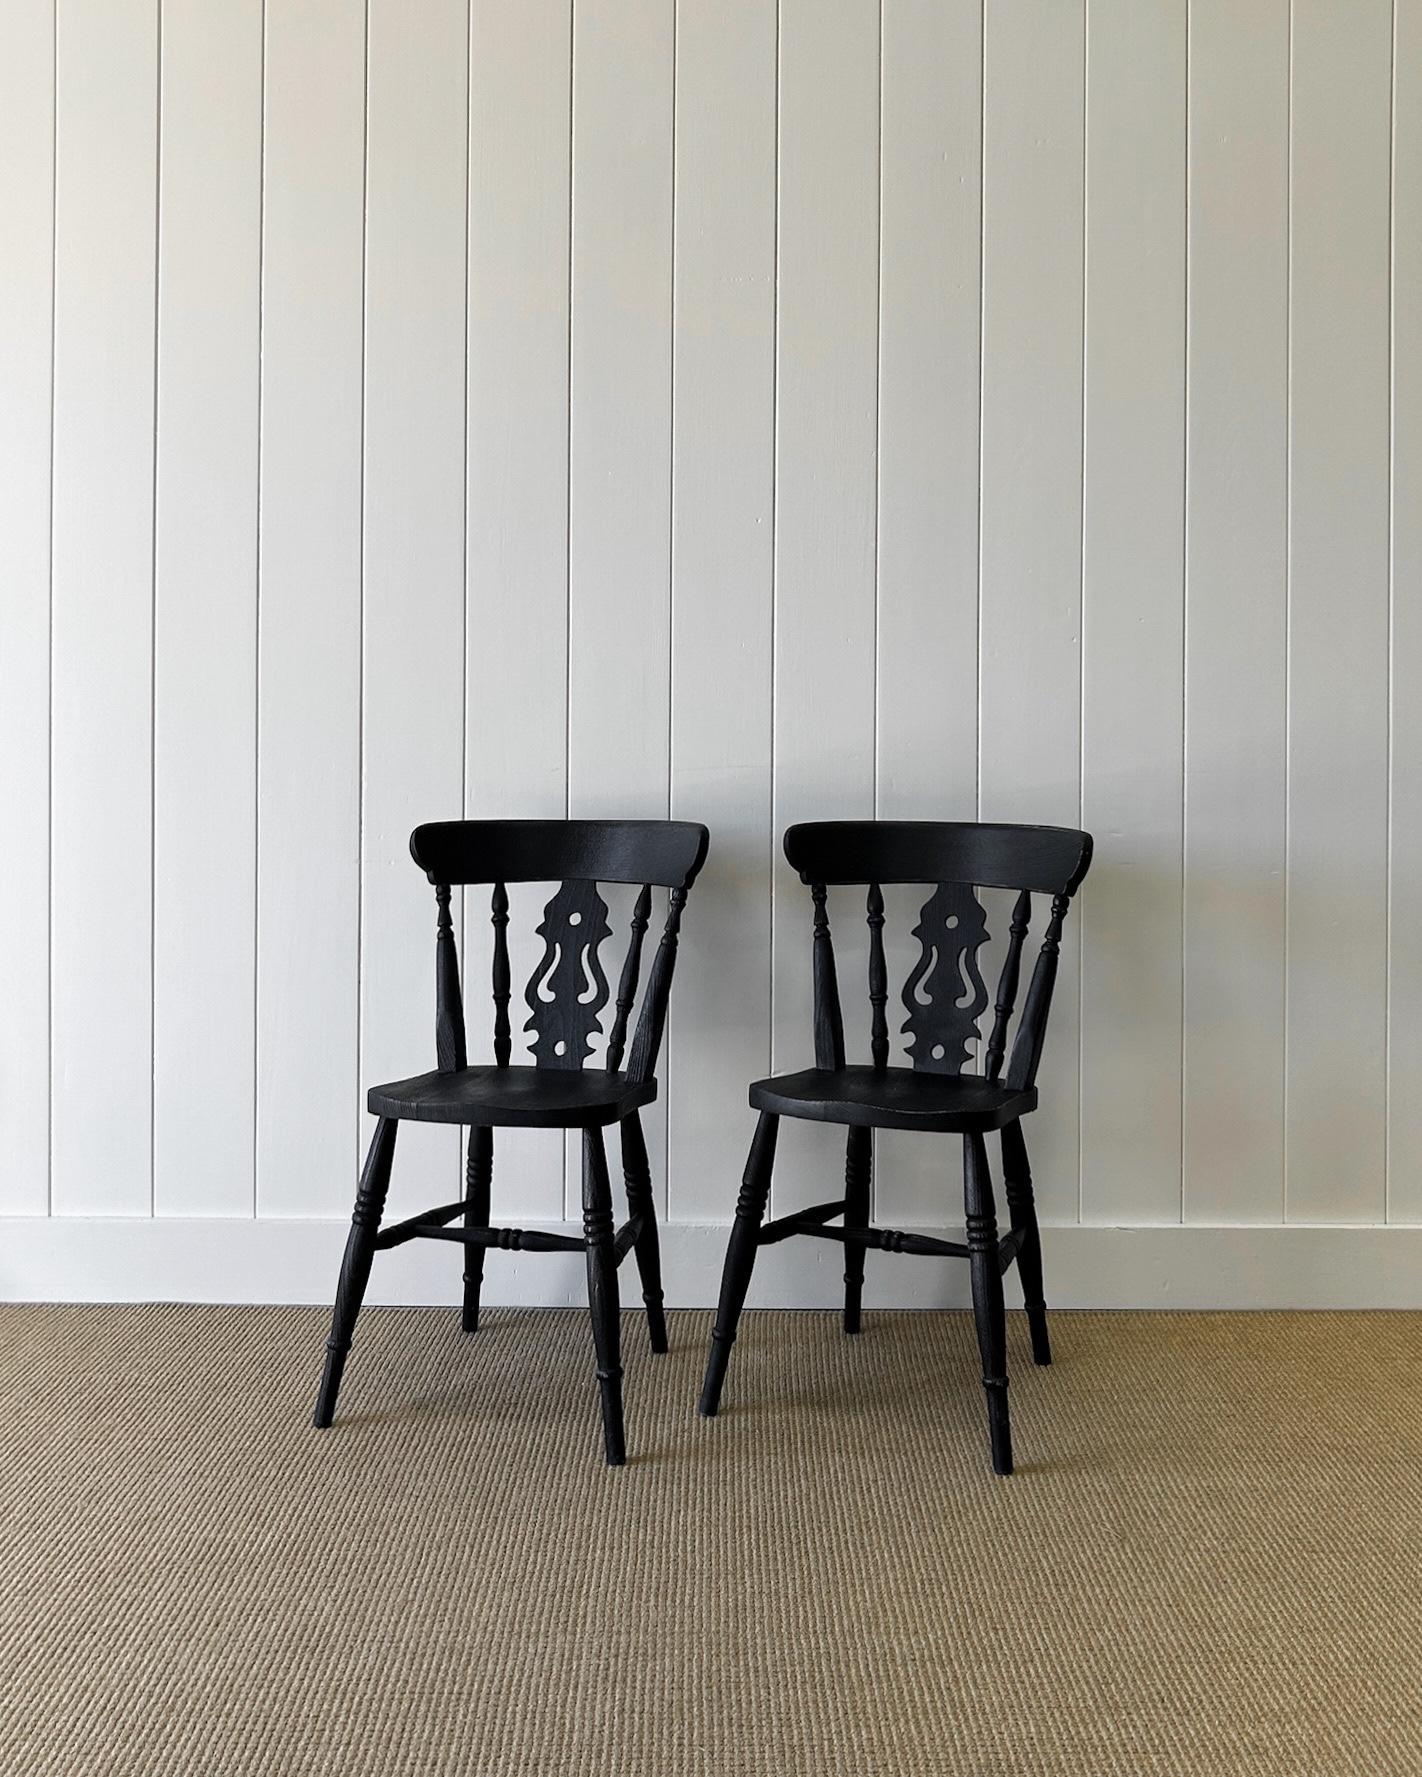 A Vintage Set of 6 Fiddleback Chairs Painted Black In Good Condition For Sale In Oak Park, MI